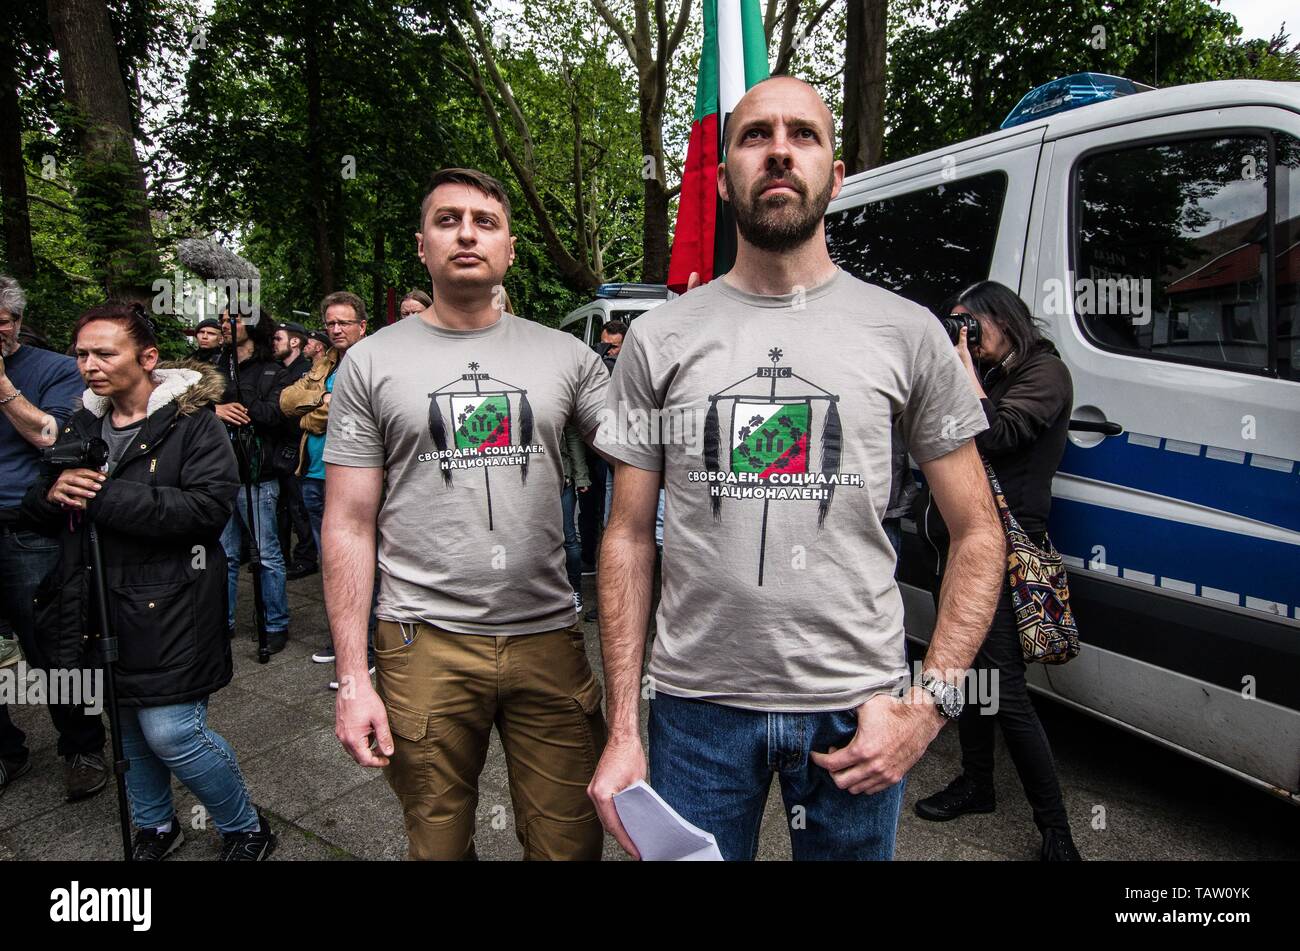 Dortmund, Nordrhein Westfalen, Germany. 25th May, 2019. Members of the BNS Bulgarski Nationalen Sajuz Bulgarischer Nationalbund neonazi group were in Dortmund, Germany expressing support for die Rechte. Prior to the European Elections, the neonazi party Die Rechte (The Right) organized a rally in the German city of Dortmund to promote their candidate, the incarcerated Holocaust denier Ursula Haverbeck. The demonstration and march were organized by prominent local political figure and neonazi activist Michael Brueck (Michael BrÃ¼ck) who enlisted the help of not only German neonazis, but also Stock Photo